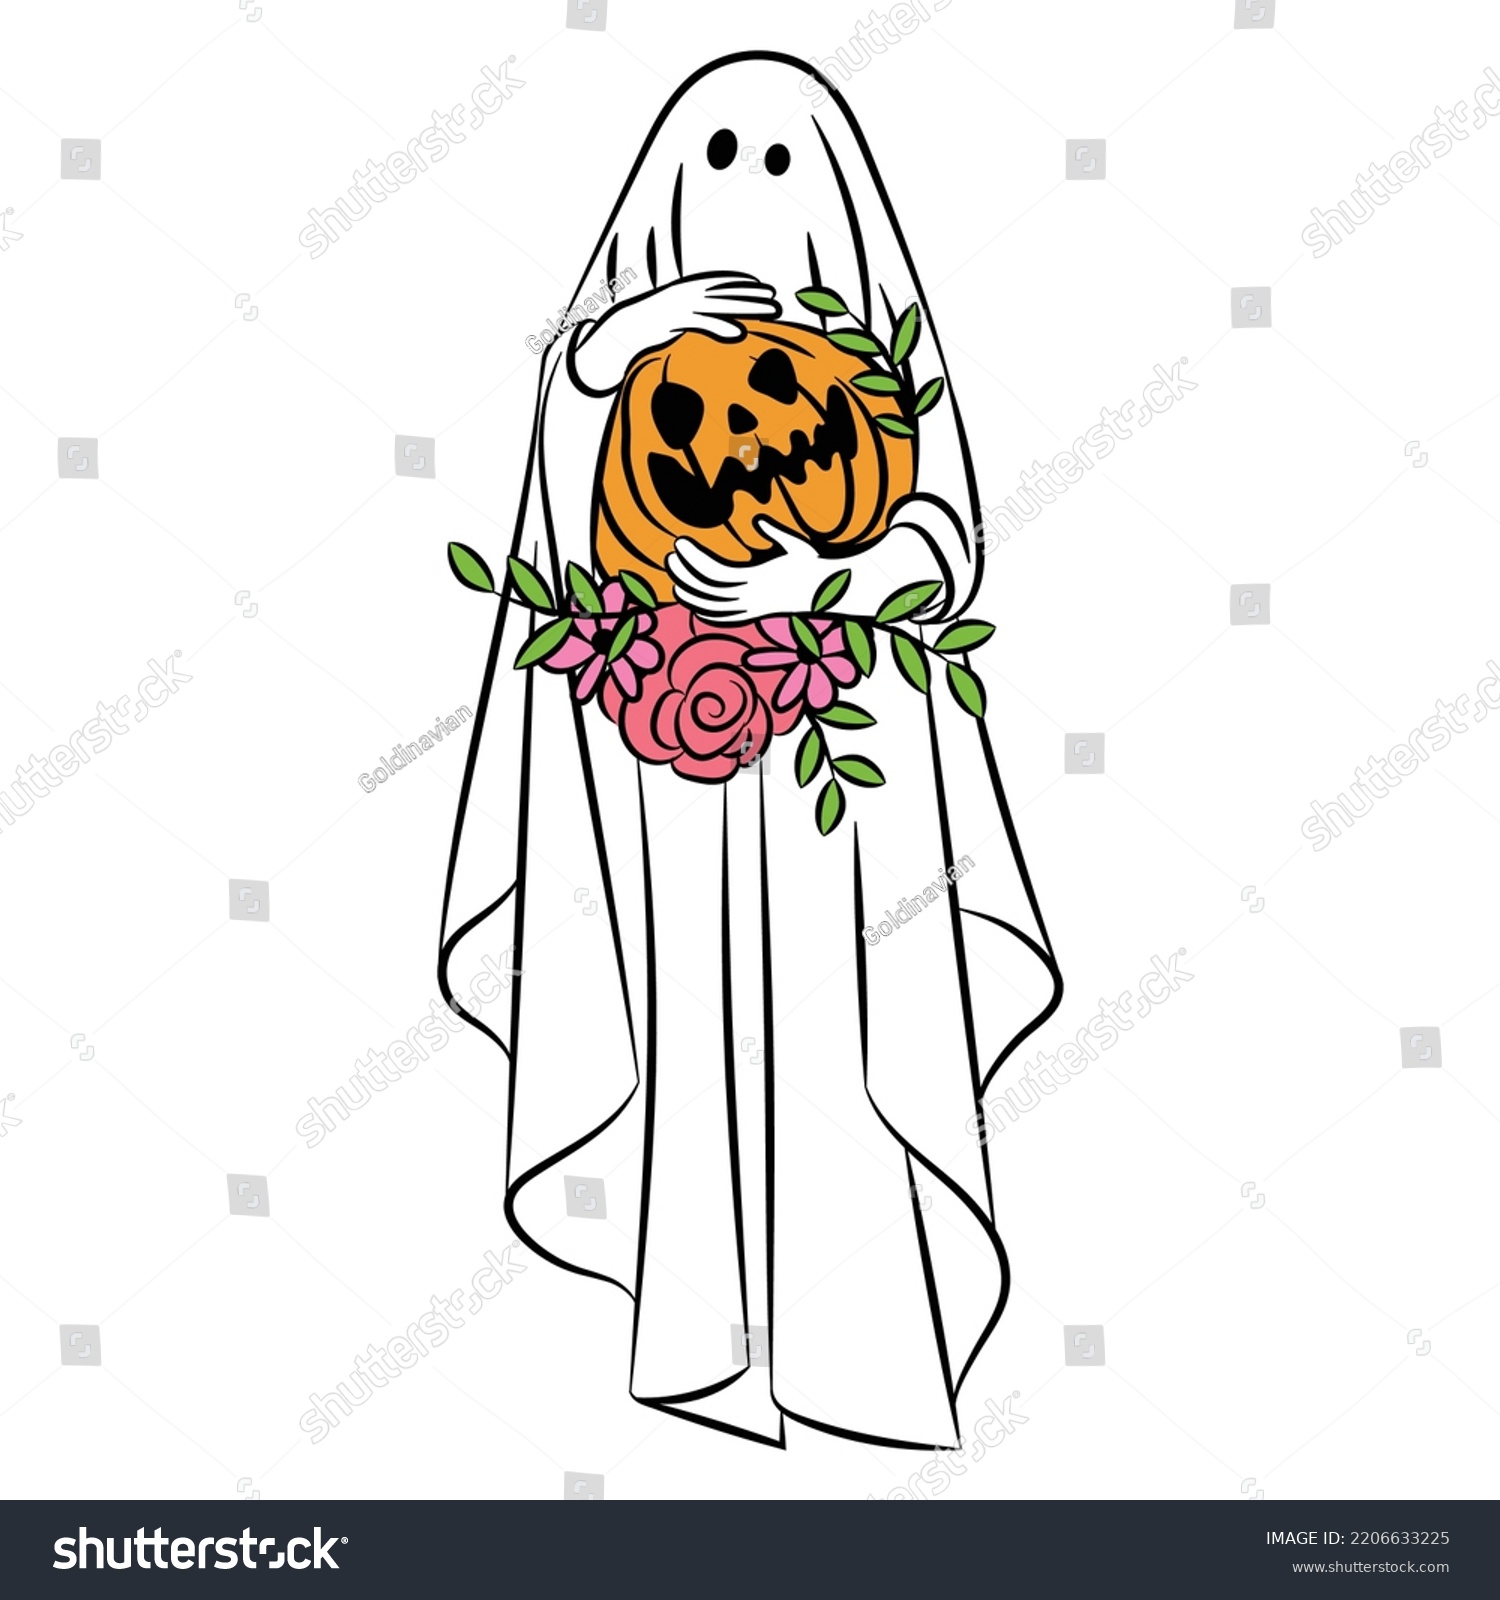 SVG of Cute floral ghost vector illustration. Boo ghosts Halloween hand drawn designs for October autumn holidays.
Spooky spirits with flowers and leaves  svg